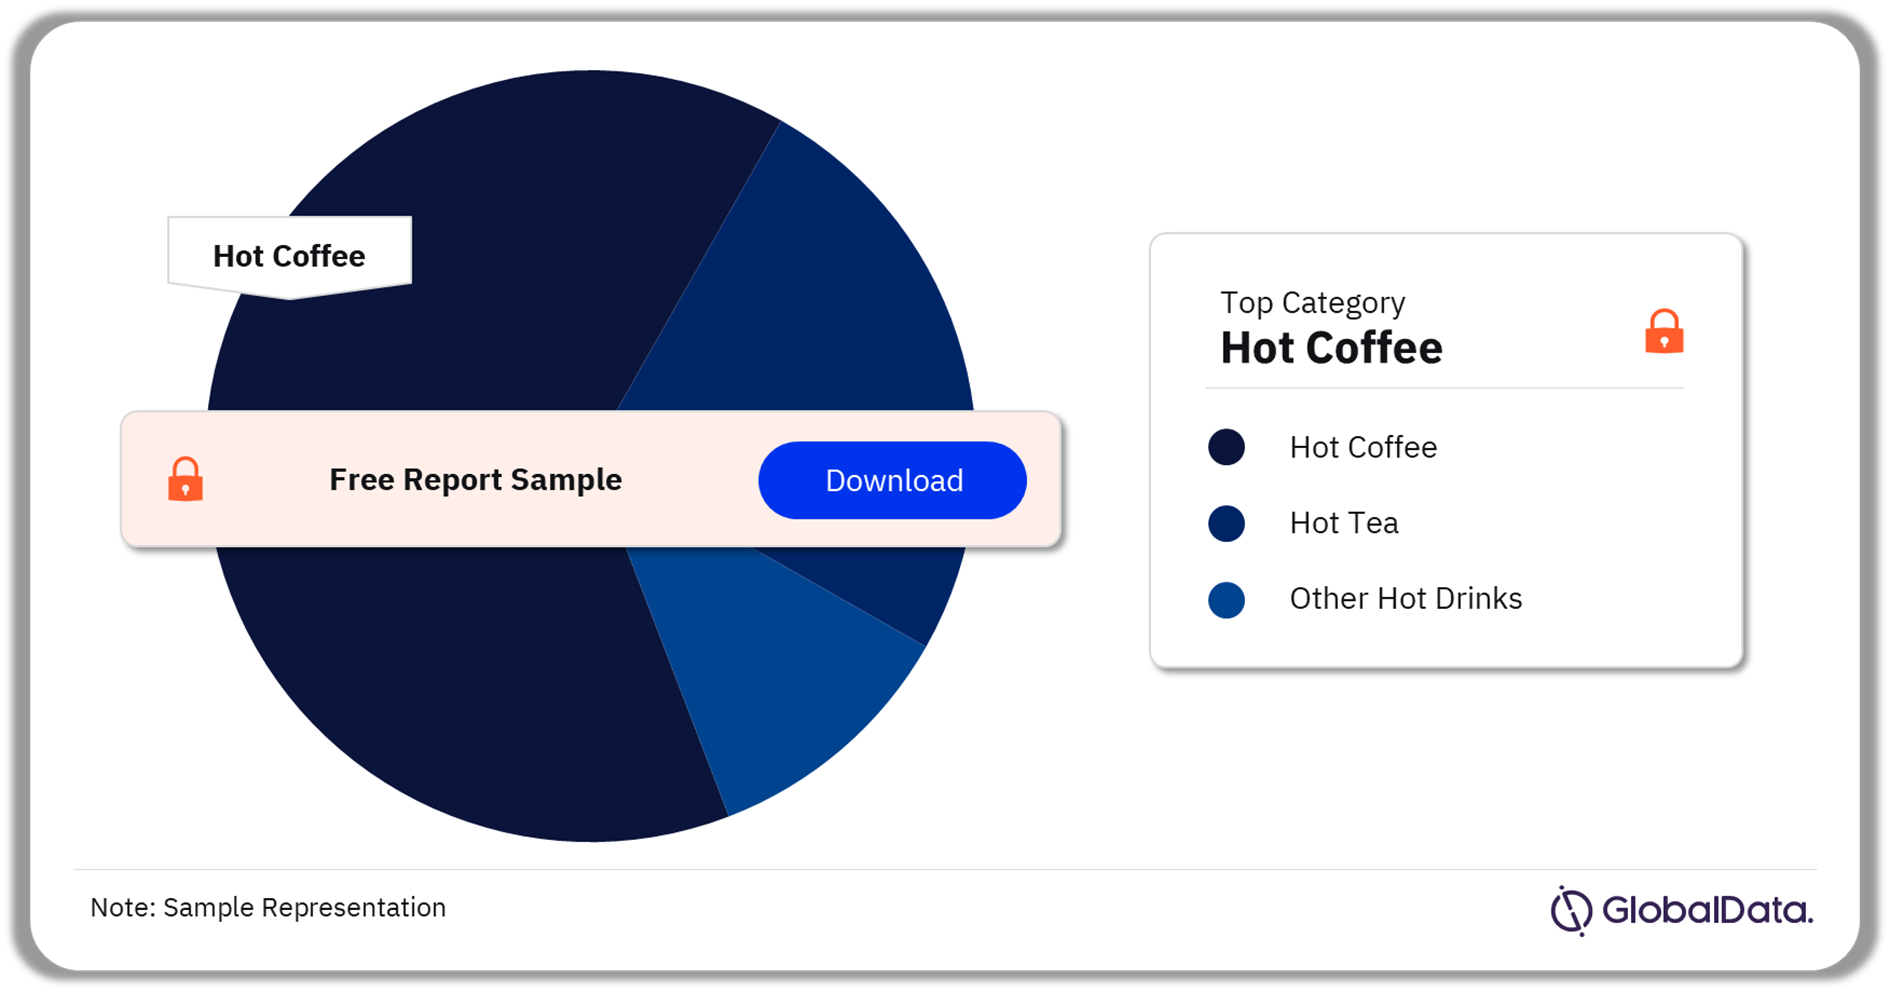 USA Hot Drinks Market Analysis by Category, 2021 (%)